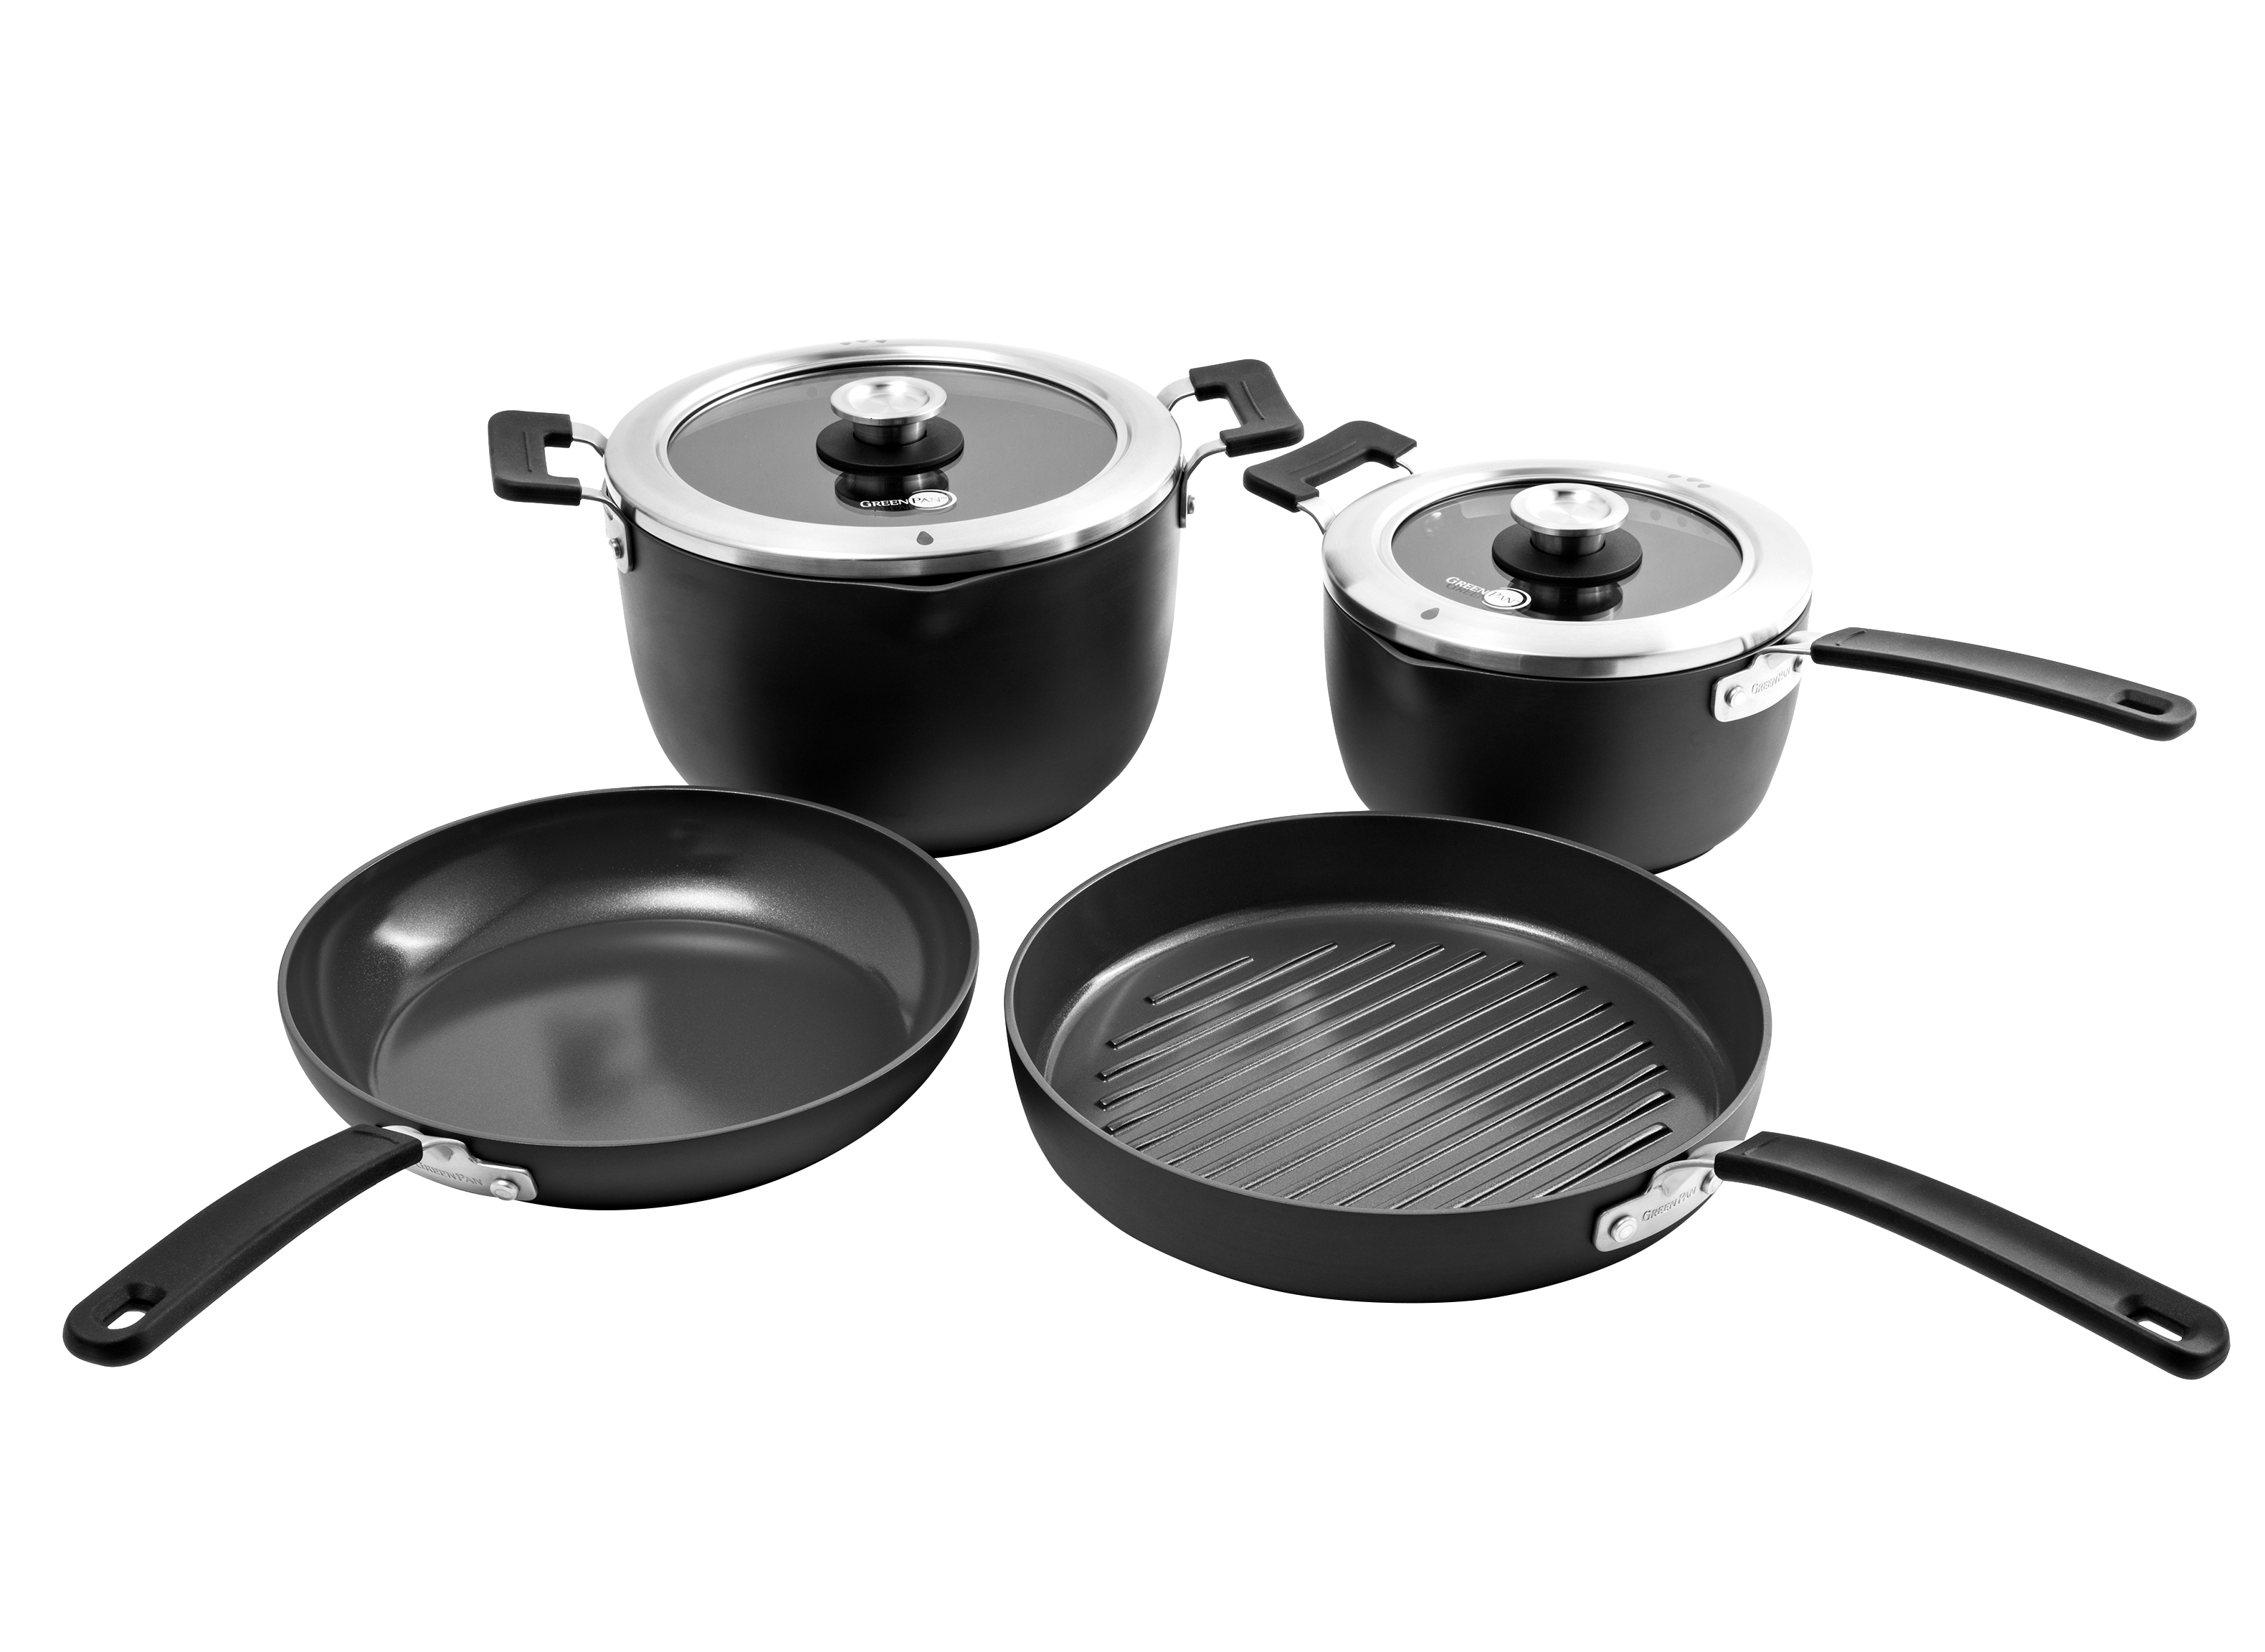 https://crdms.images.consumerreports.org/prod/products/cr/models/399706-cookware-sets-nonstick-greenpan-stackable-anodized-10008481.png